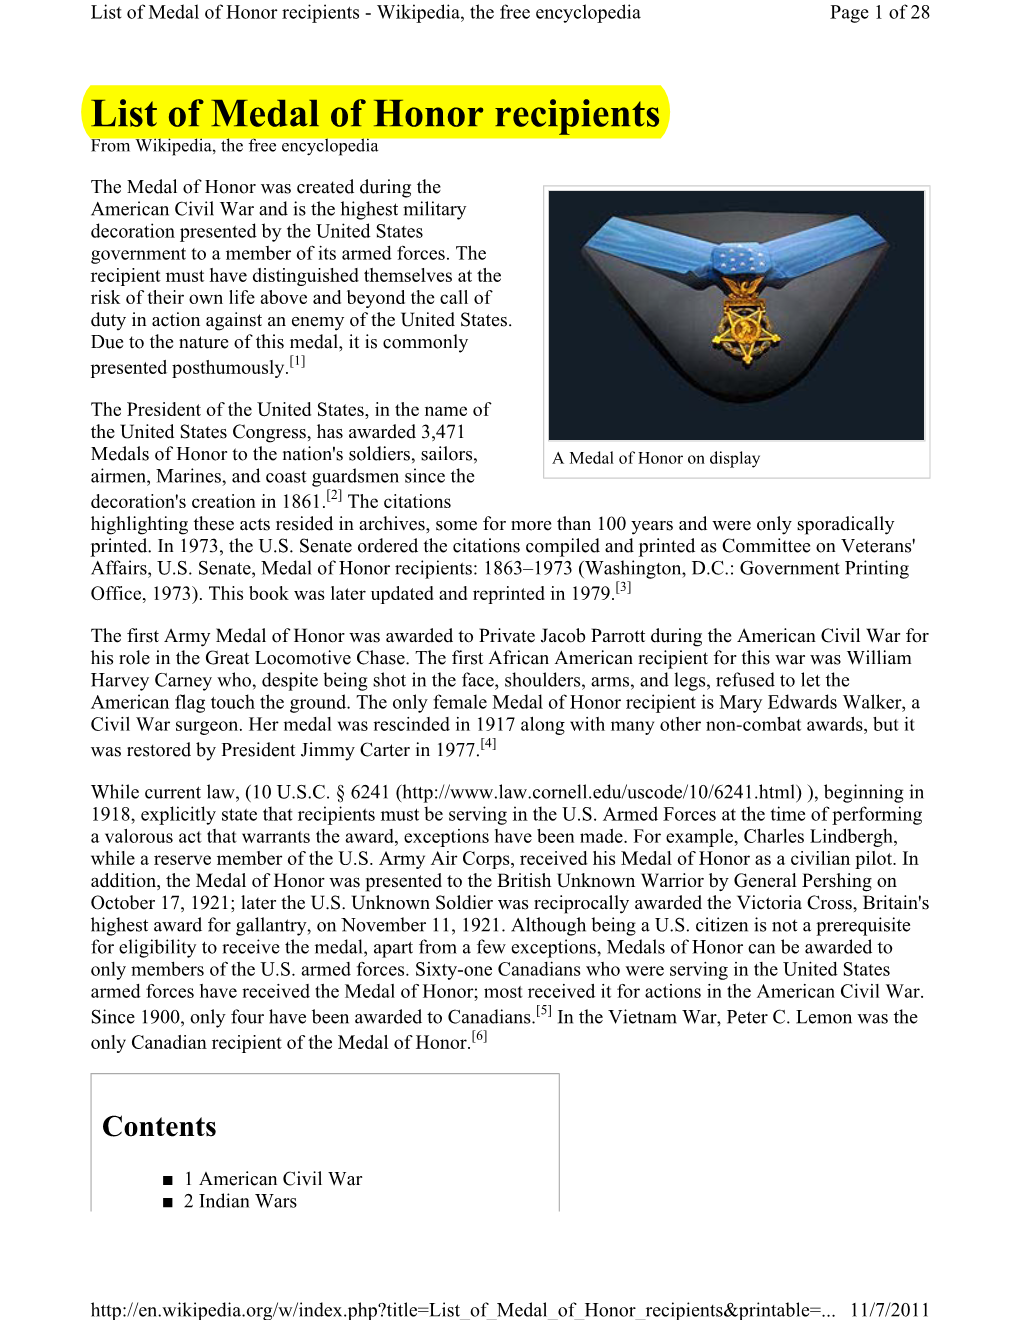 List of Medal of Honor Recipients - Wikipedia, the Free Encyclopedia Page 1 of 28